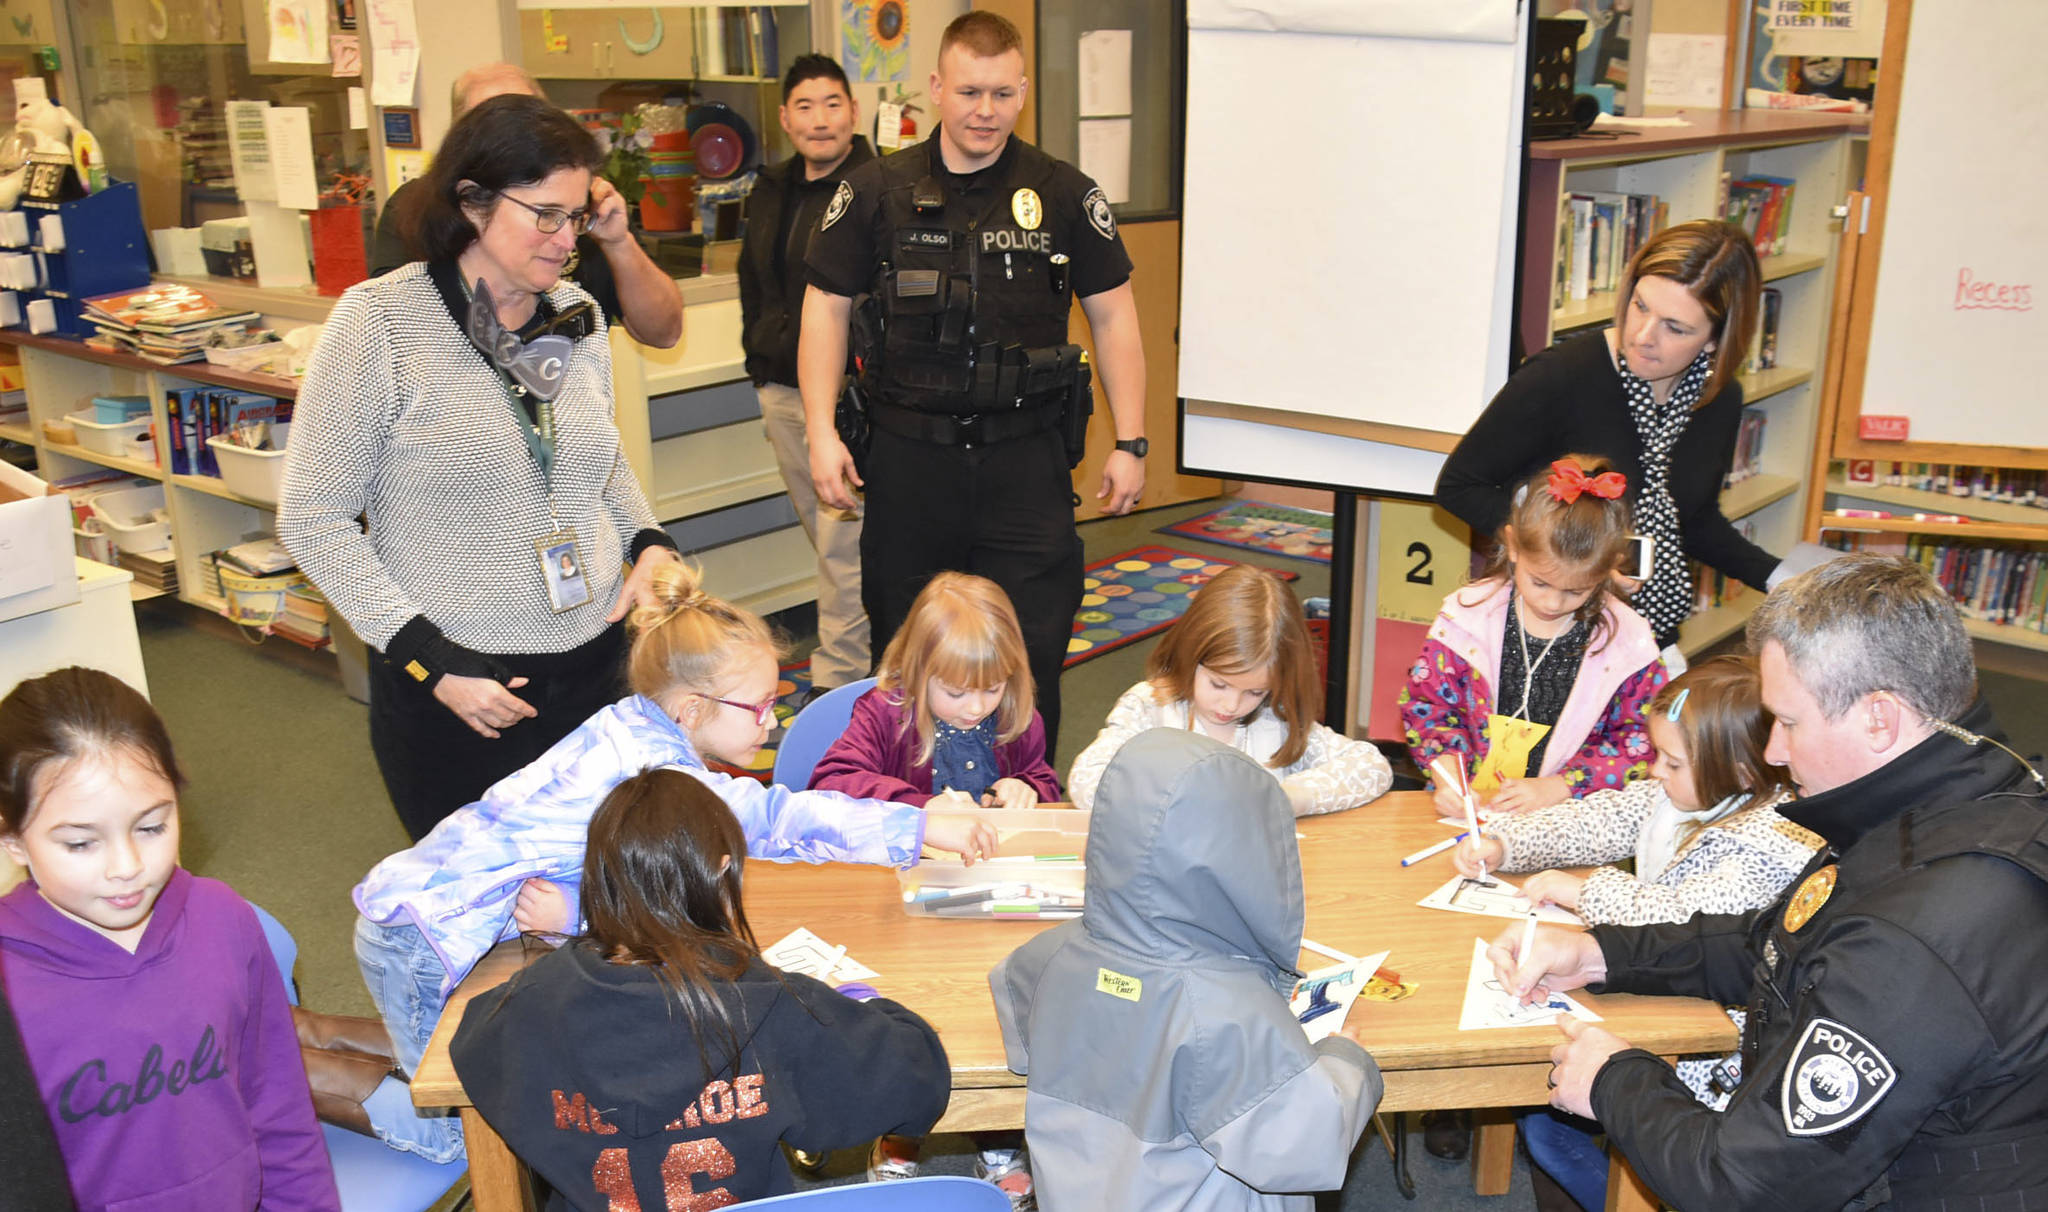 Arlington police officers color pictures with Eagle Creek Elementary students during the Great Kindness Challenge Jan. 29. The nationwide event is designed to spread kindness in the community.